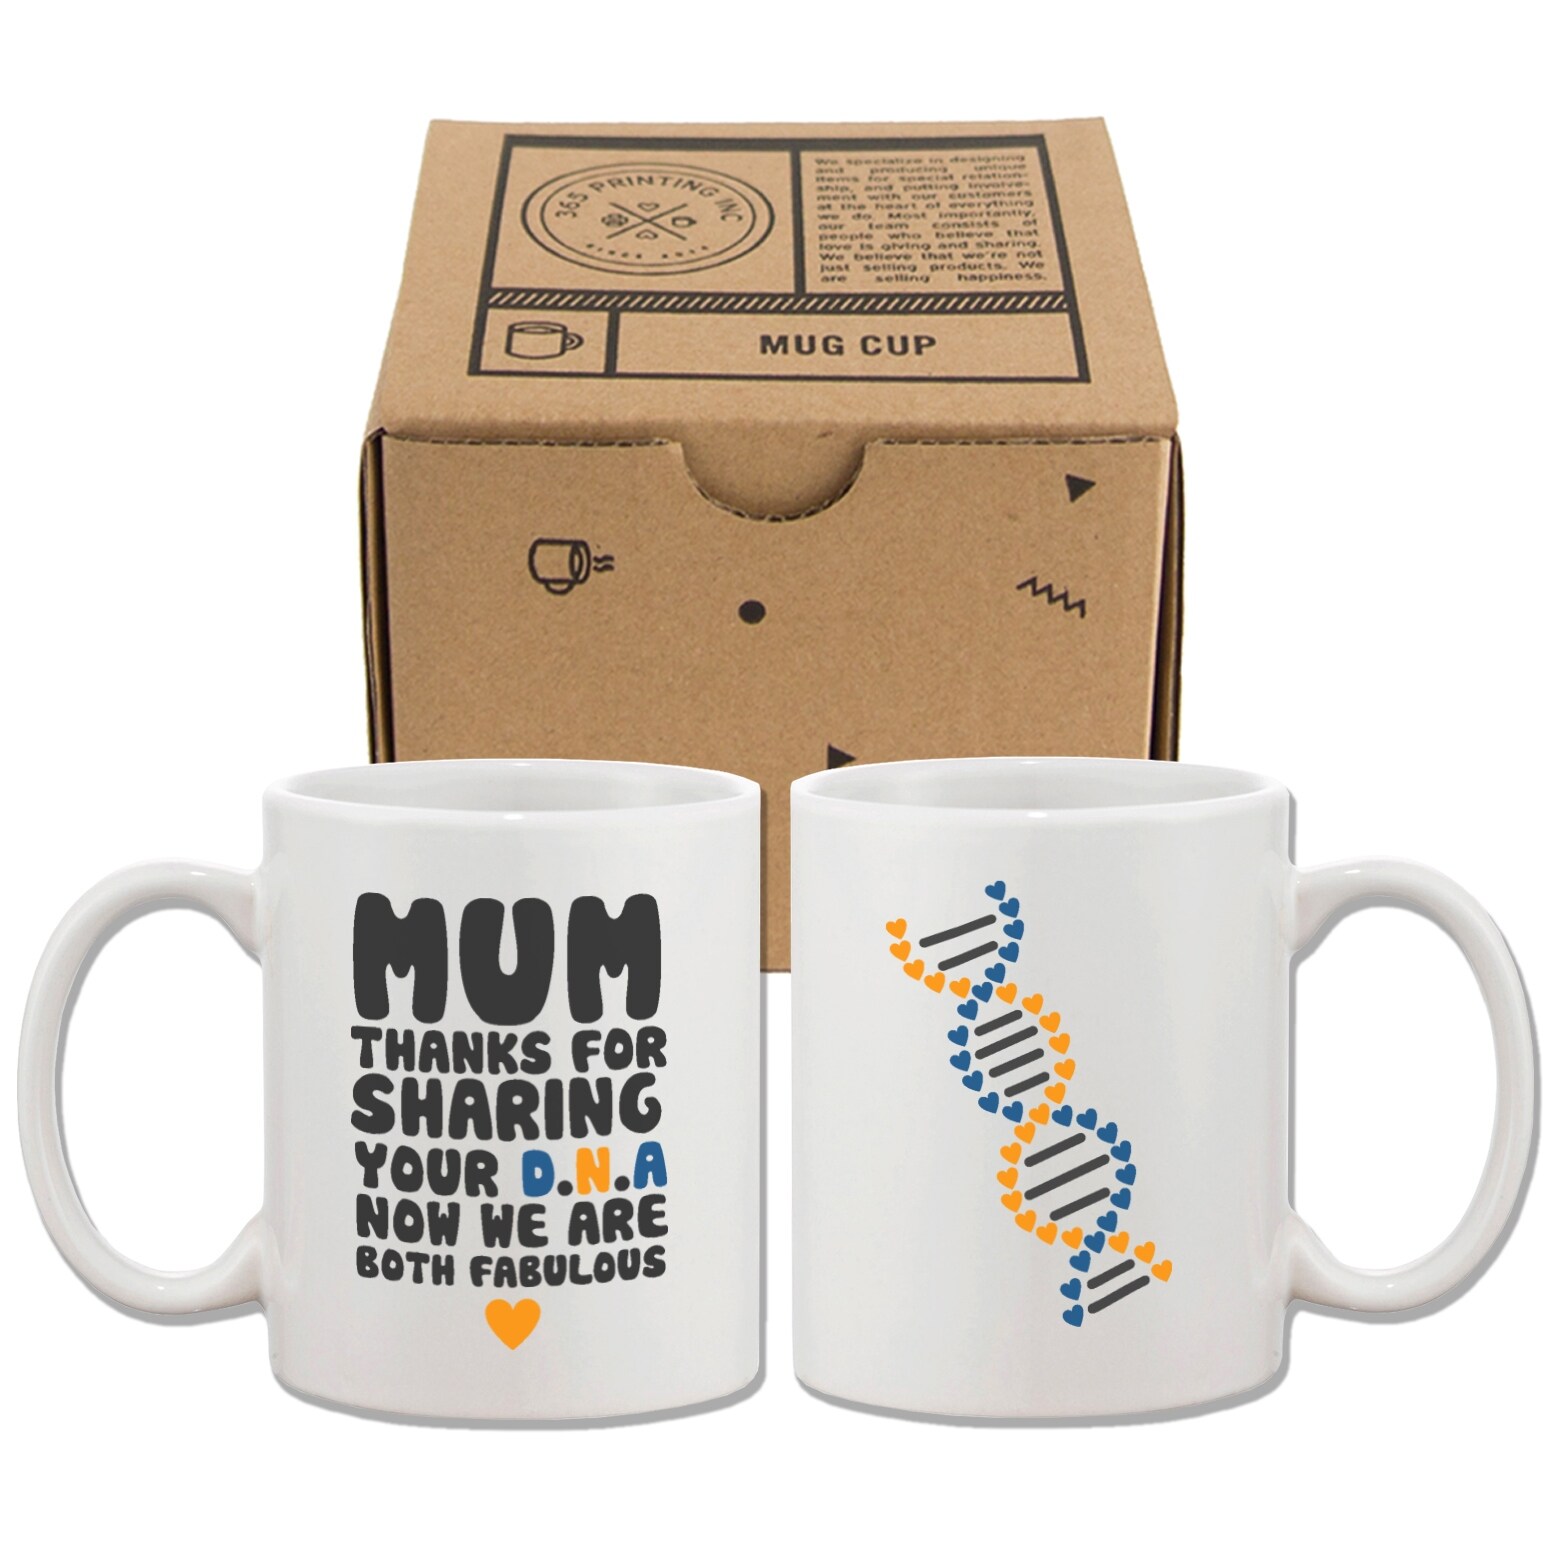 https://ak1.ostkcdn.com/images/products/is/images/direct/513ac10be3218c0c06da68a2169f3074e67b9081/Mum-Thanks-For-Sharing-Your-DNA-Ceramic-Mug-Cup-Cute-Mothers-Day-Gifts-For-Mom.jpg